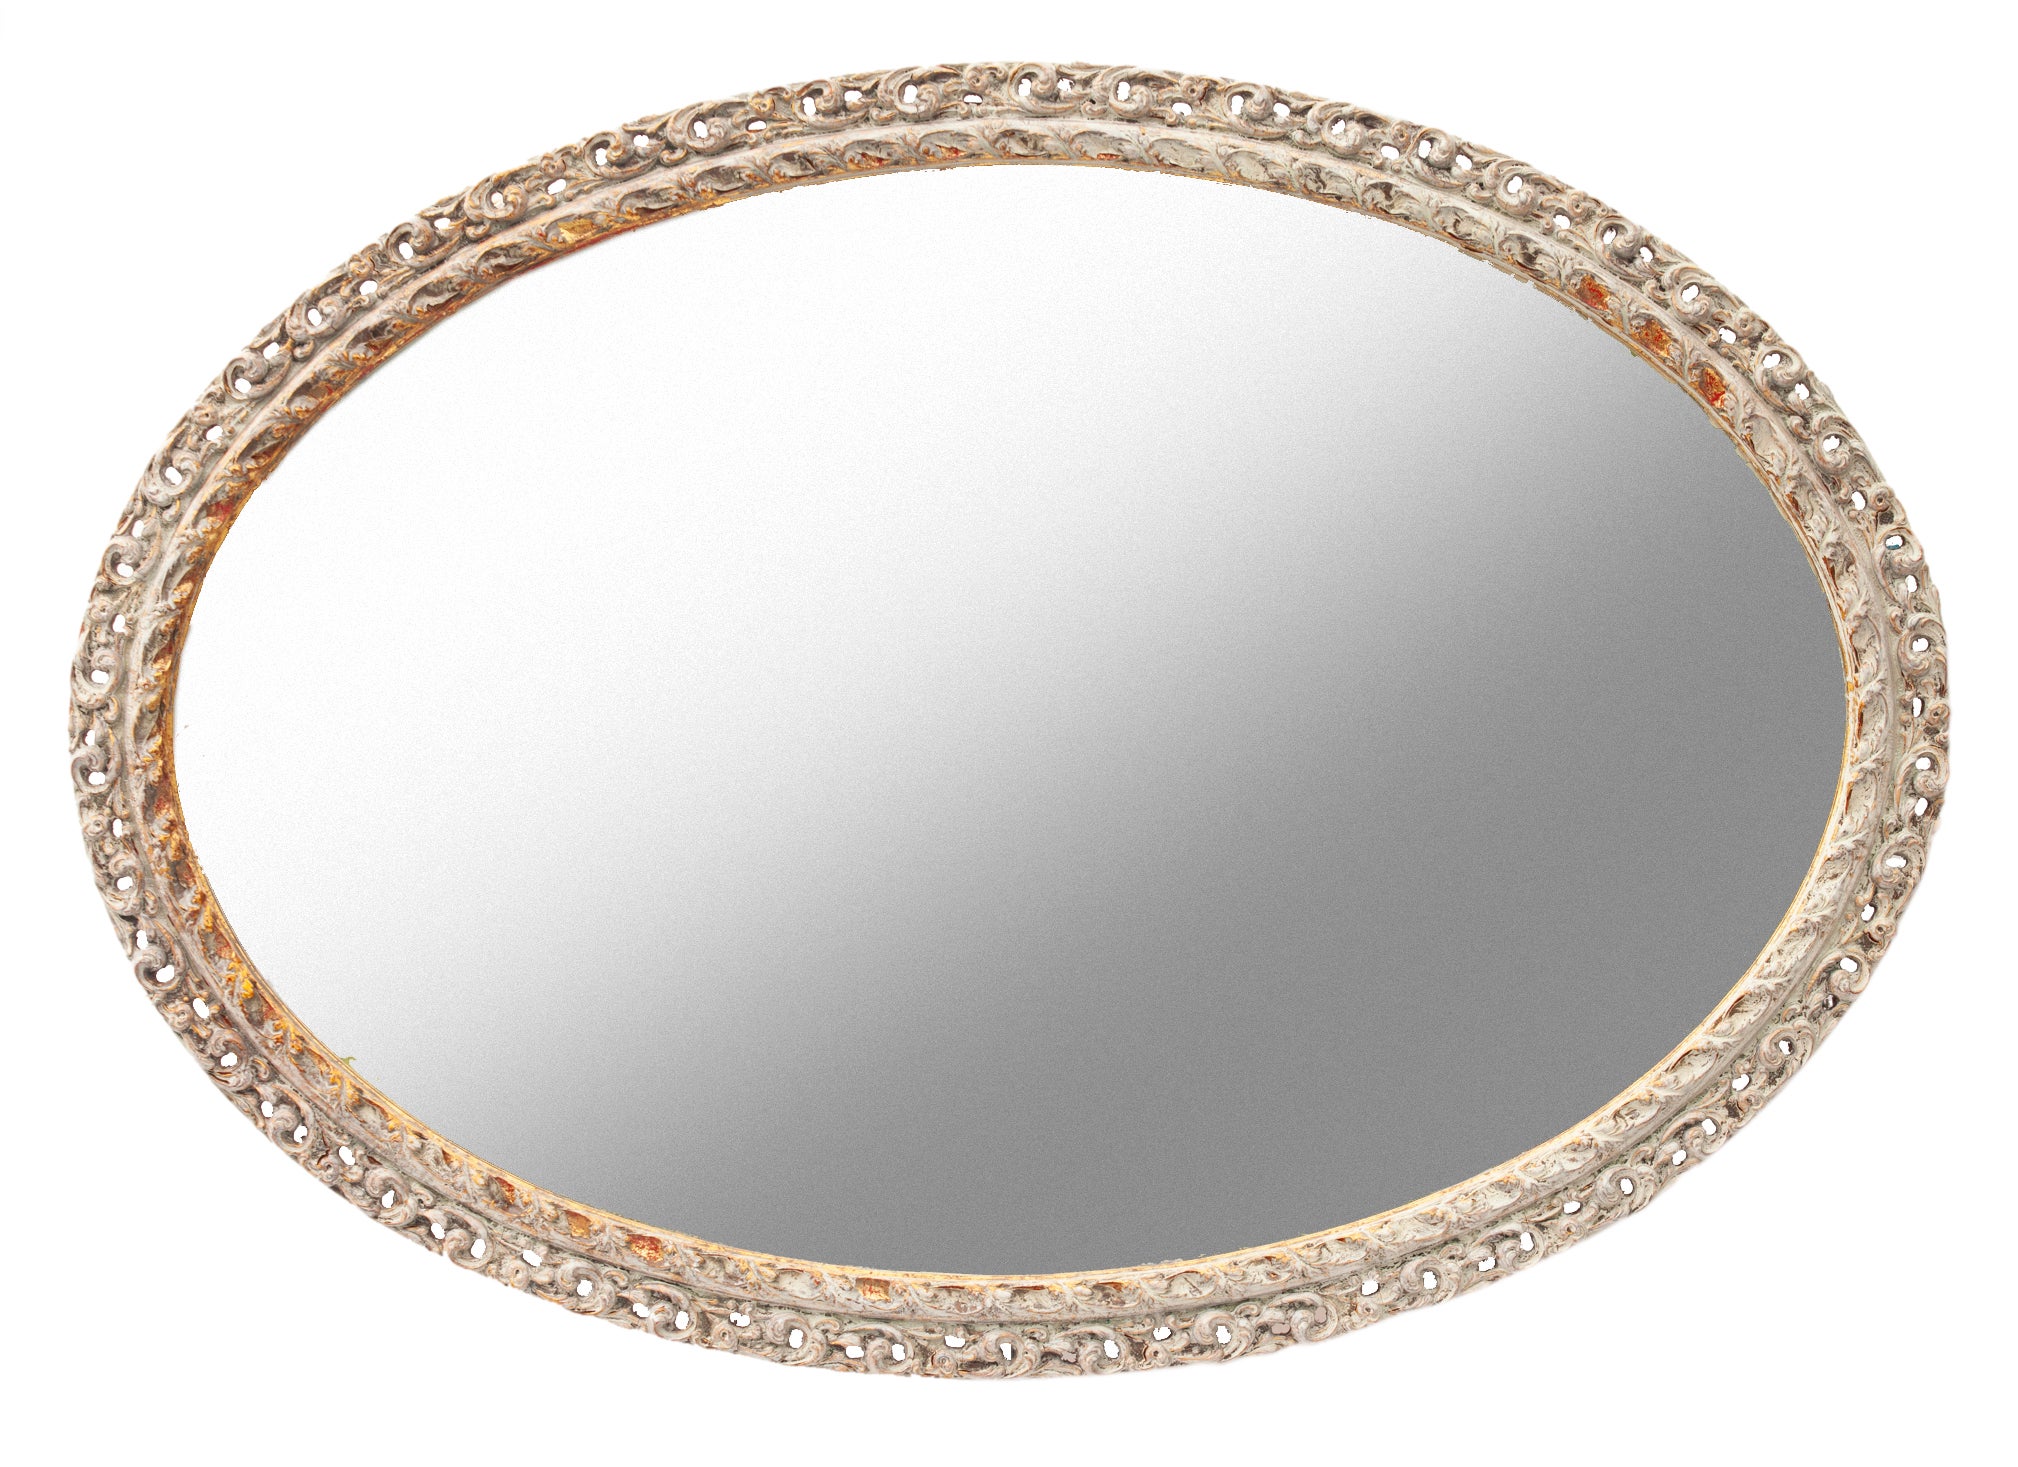 Vintage European oval Hollywood Regency style framed mirror with fretwork throughout.
Original mirror, finished with new backing & wired to hang horizontally or vertically. Circa 1960's, 
A beautiful statement piece for the foyer, master bath or